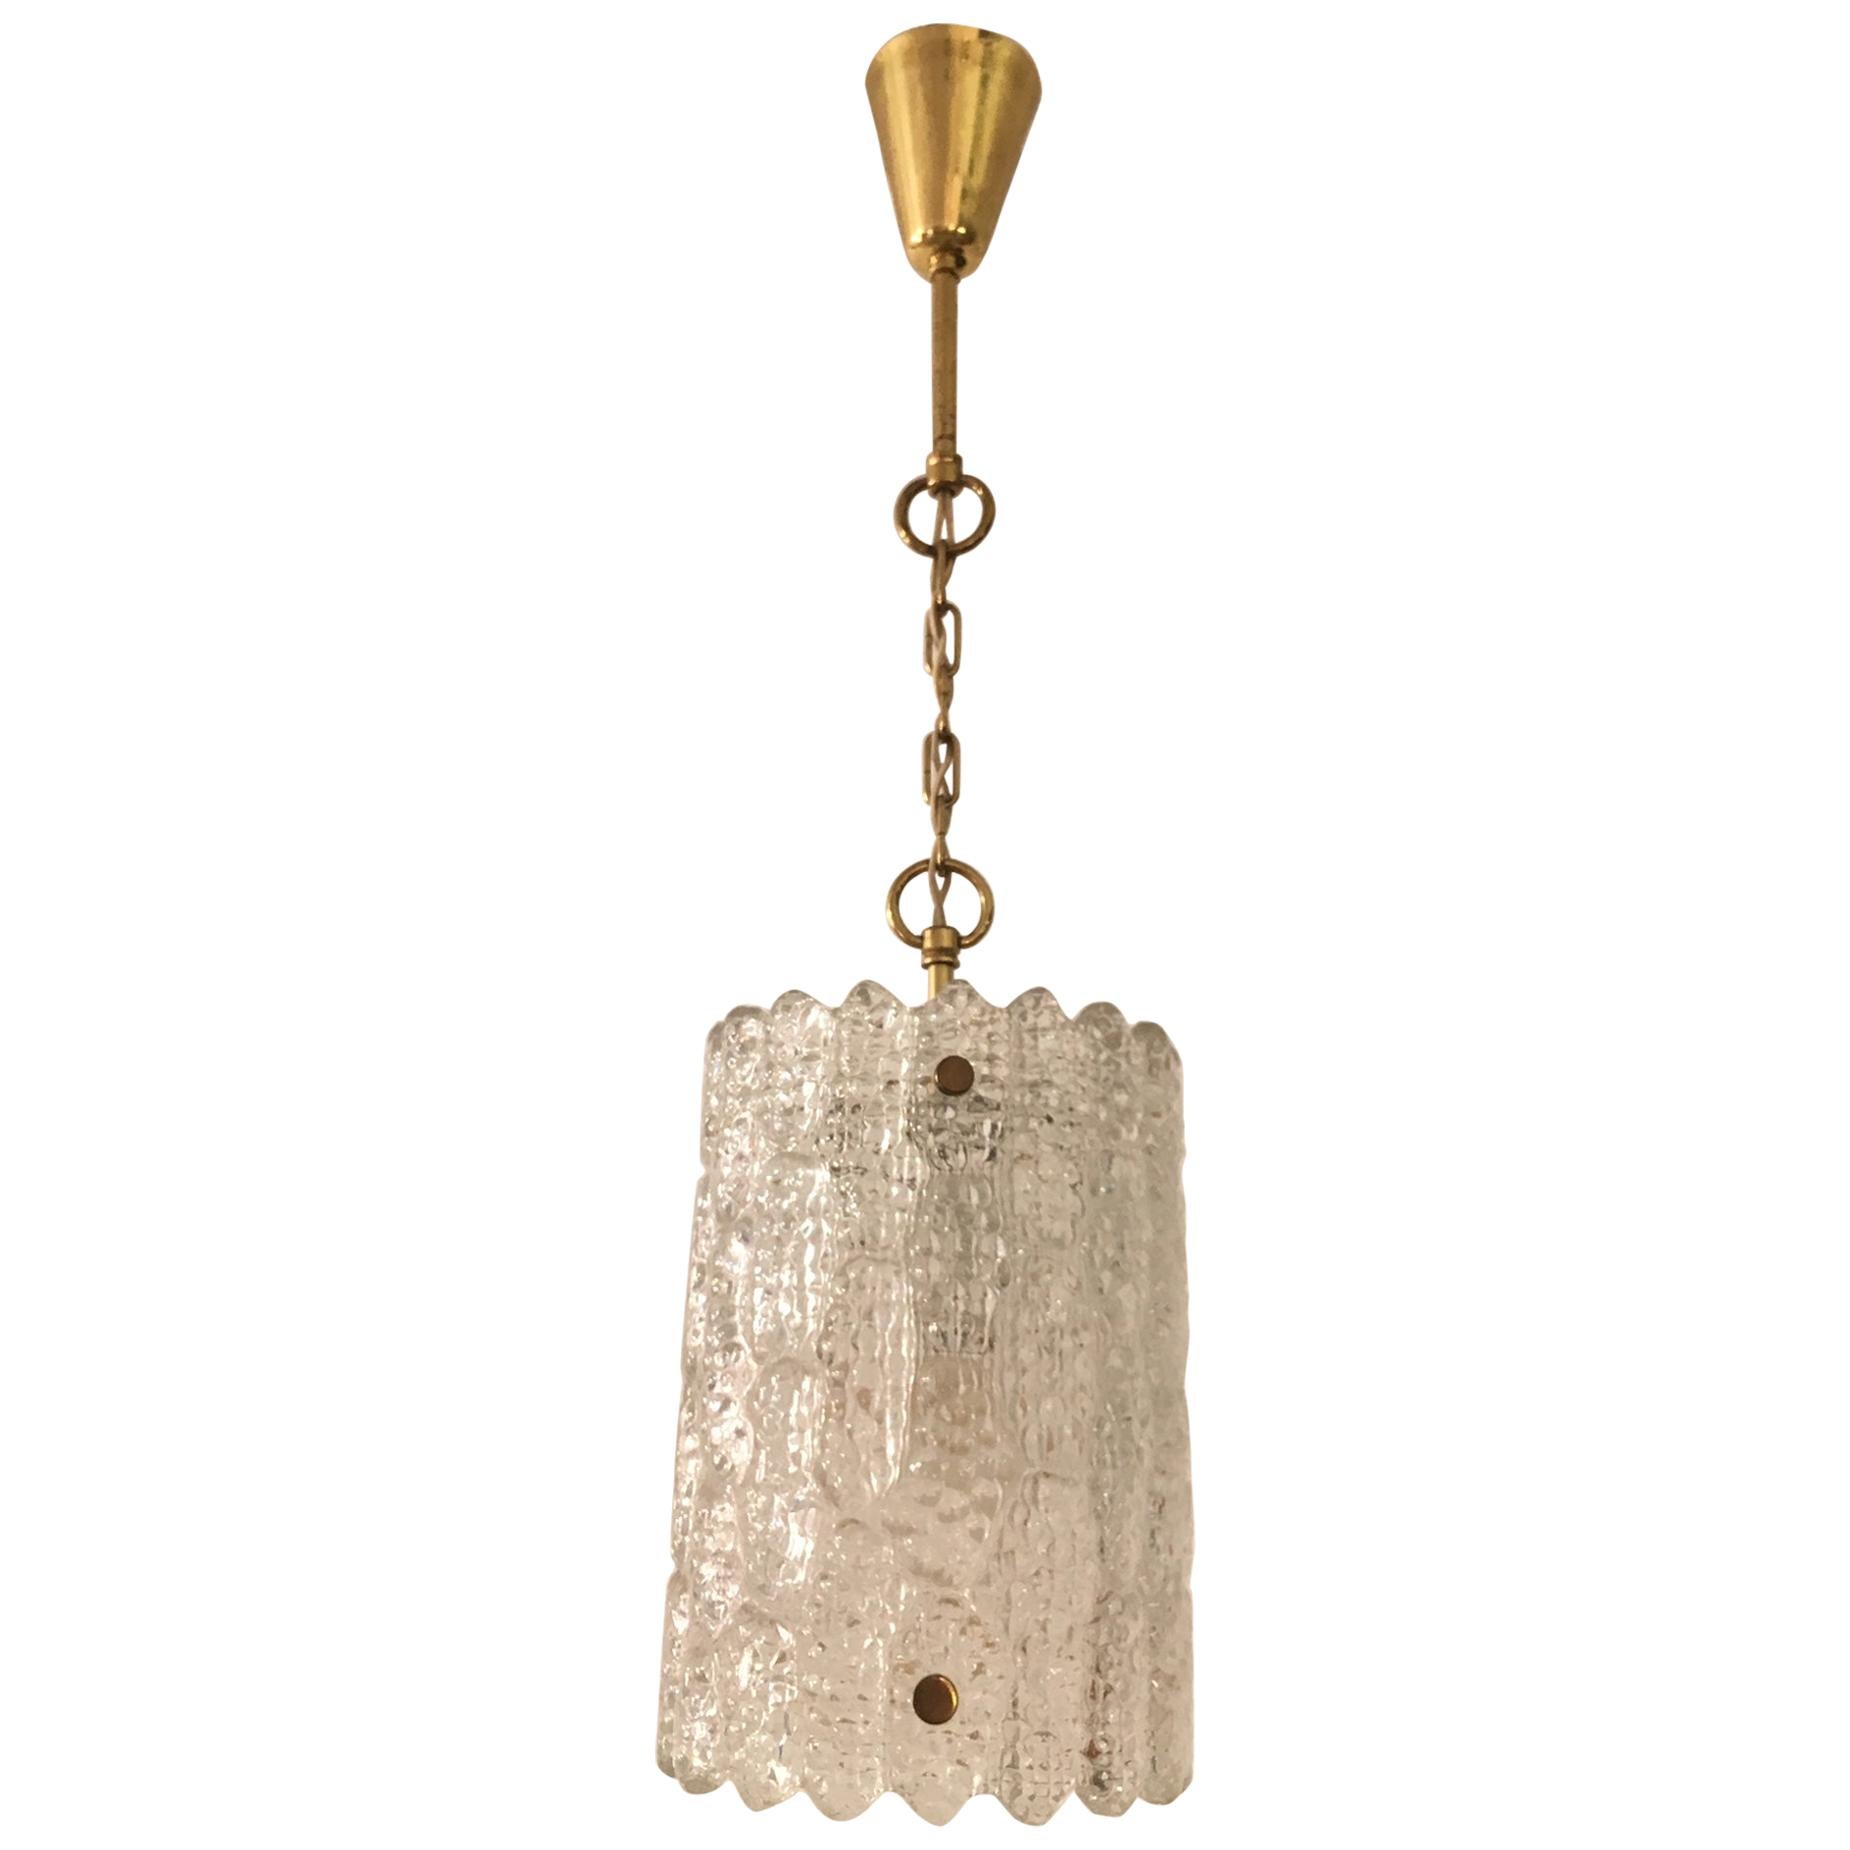 Brass and Crystal Pendant Lamp by Carl Fagerlund